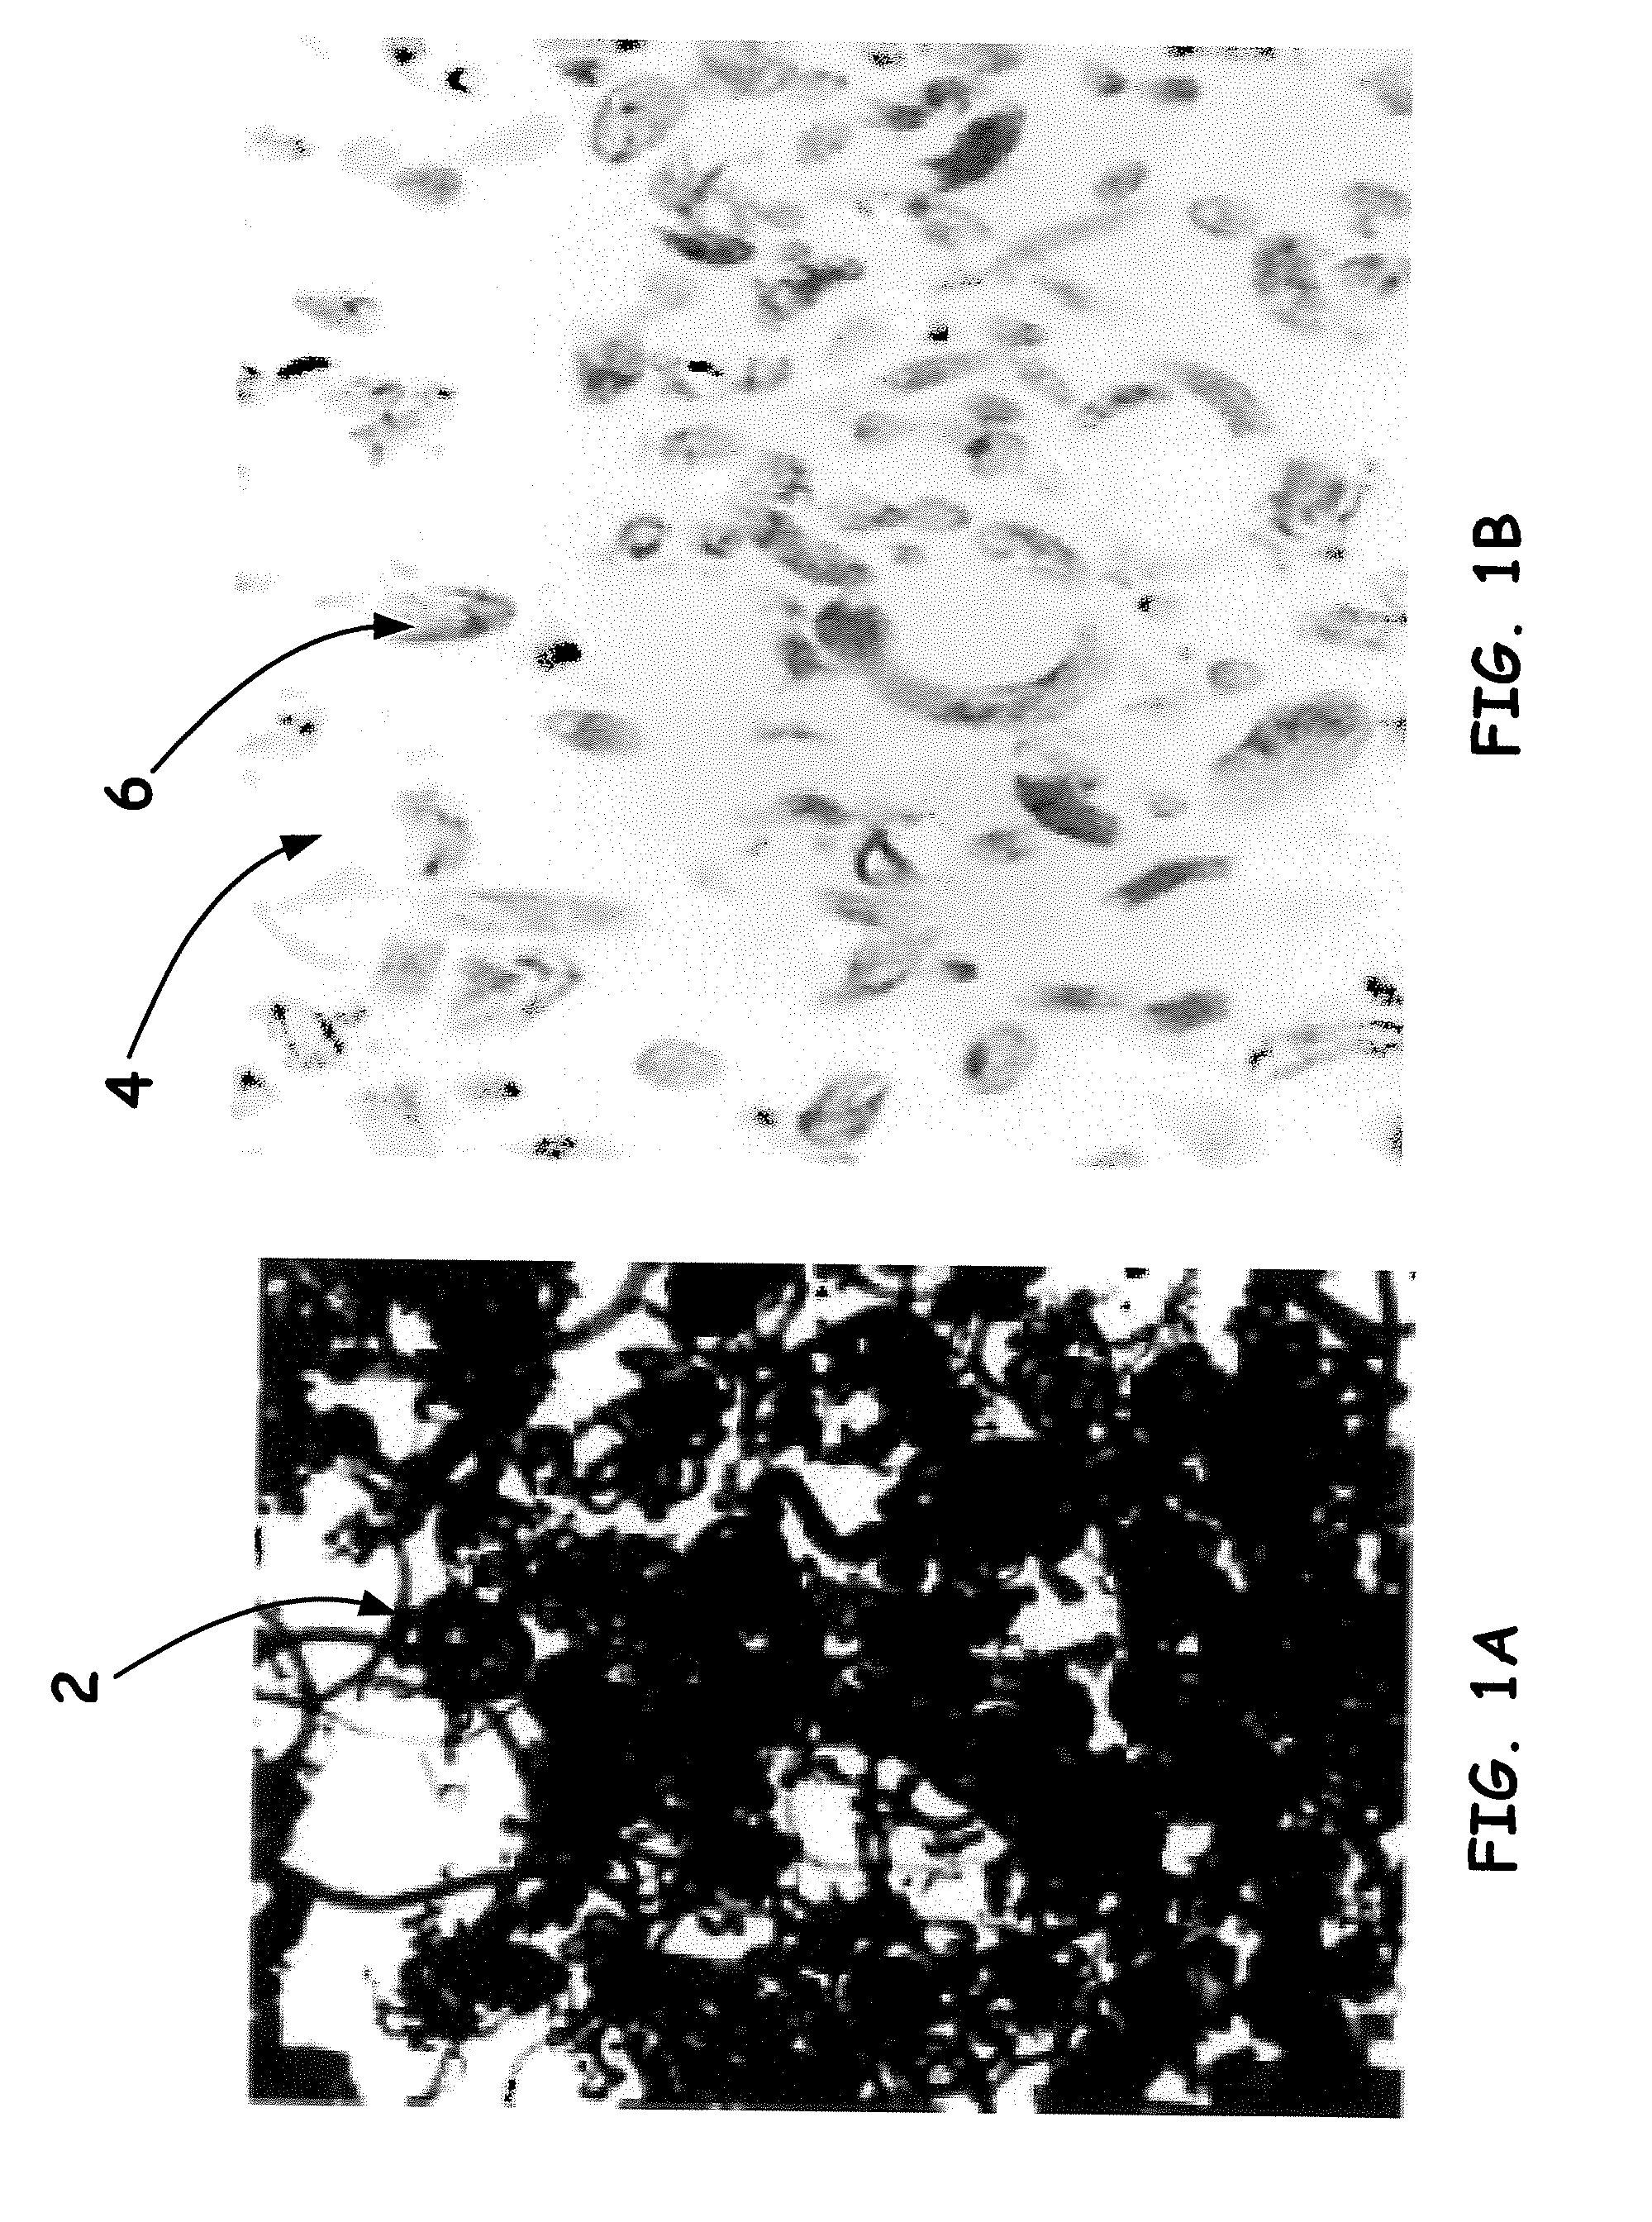 Method for conversion of dry nanomaterials into liquid nano-agents for fabrication of polymer nanocomposites and fiber reinforced composites